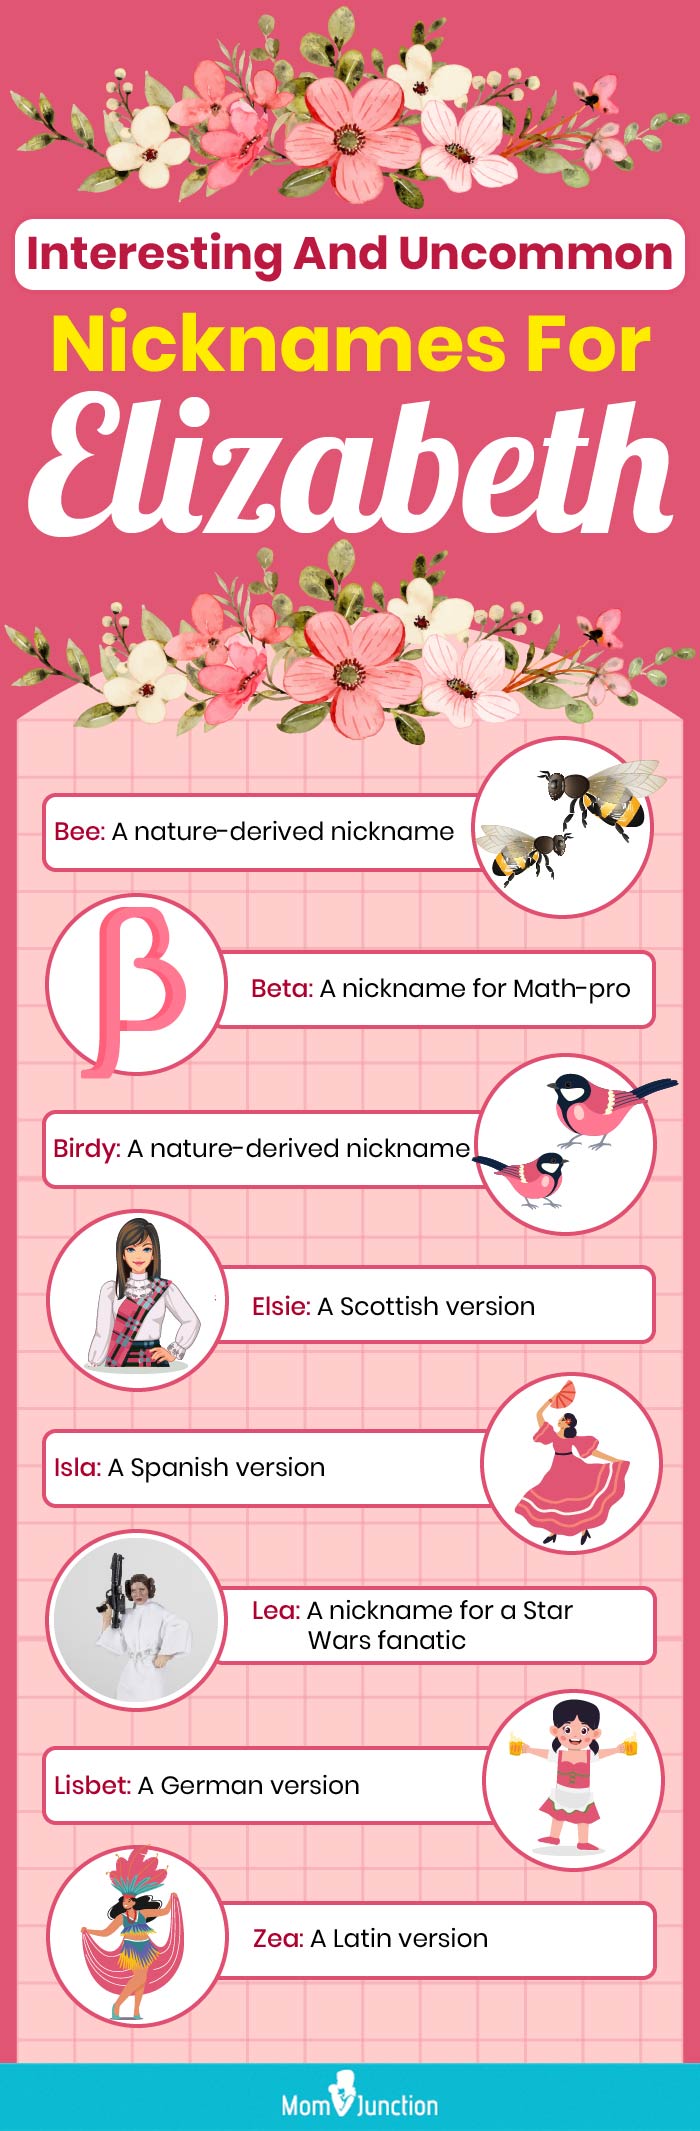 interesting and uncommon nicknames for elizabeth [infographic]